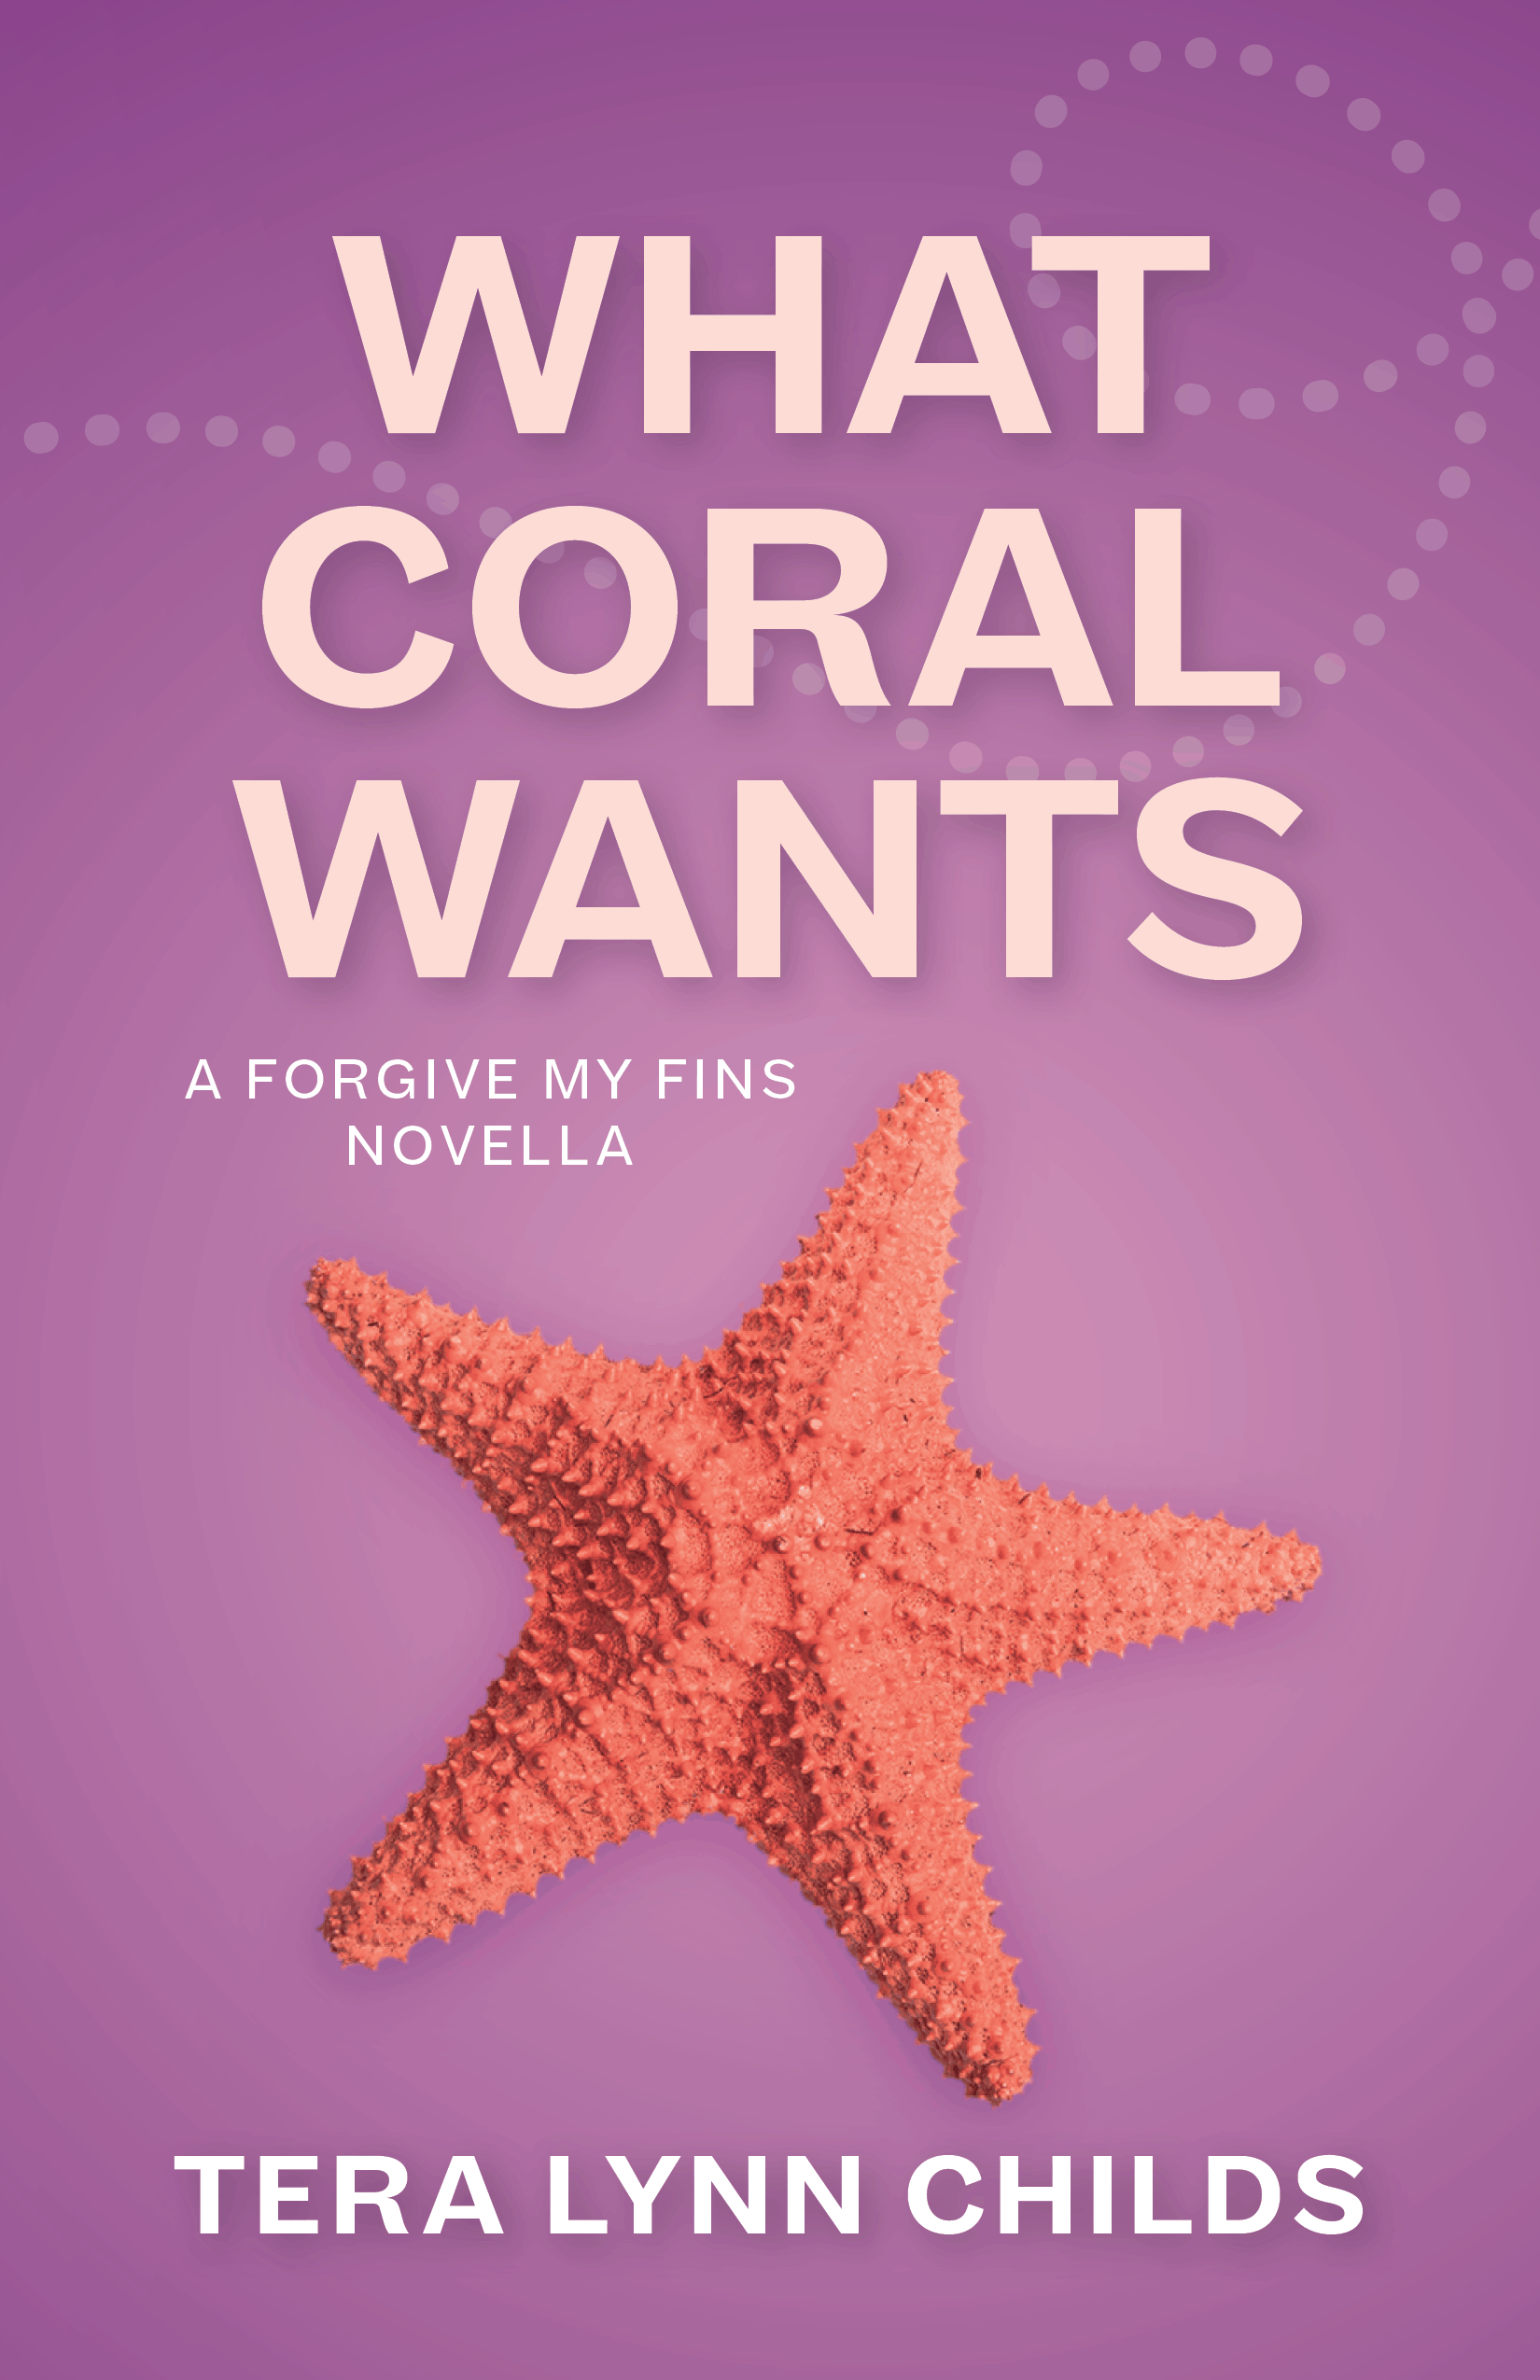 Cover of What Coral Wants, showing an orange starfish against a purple background.